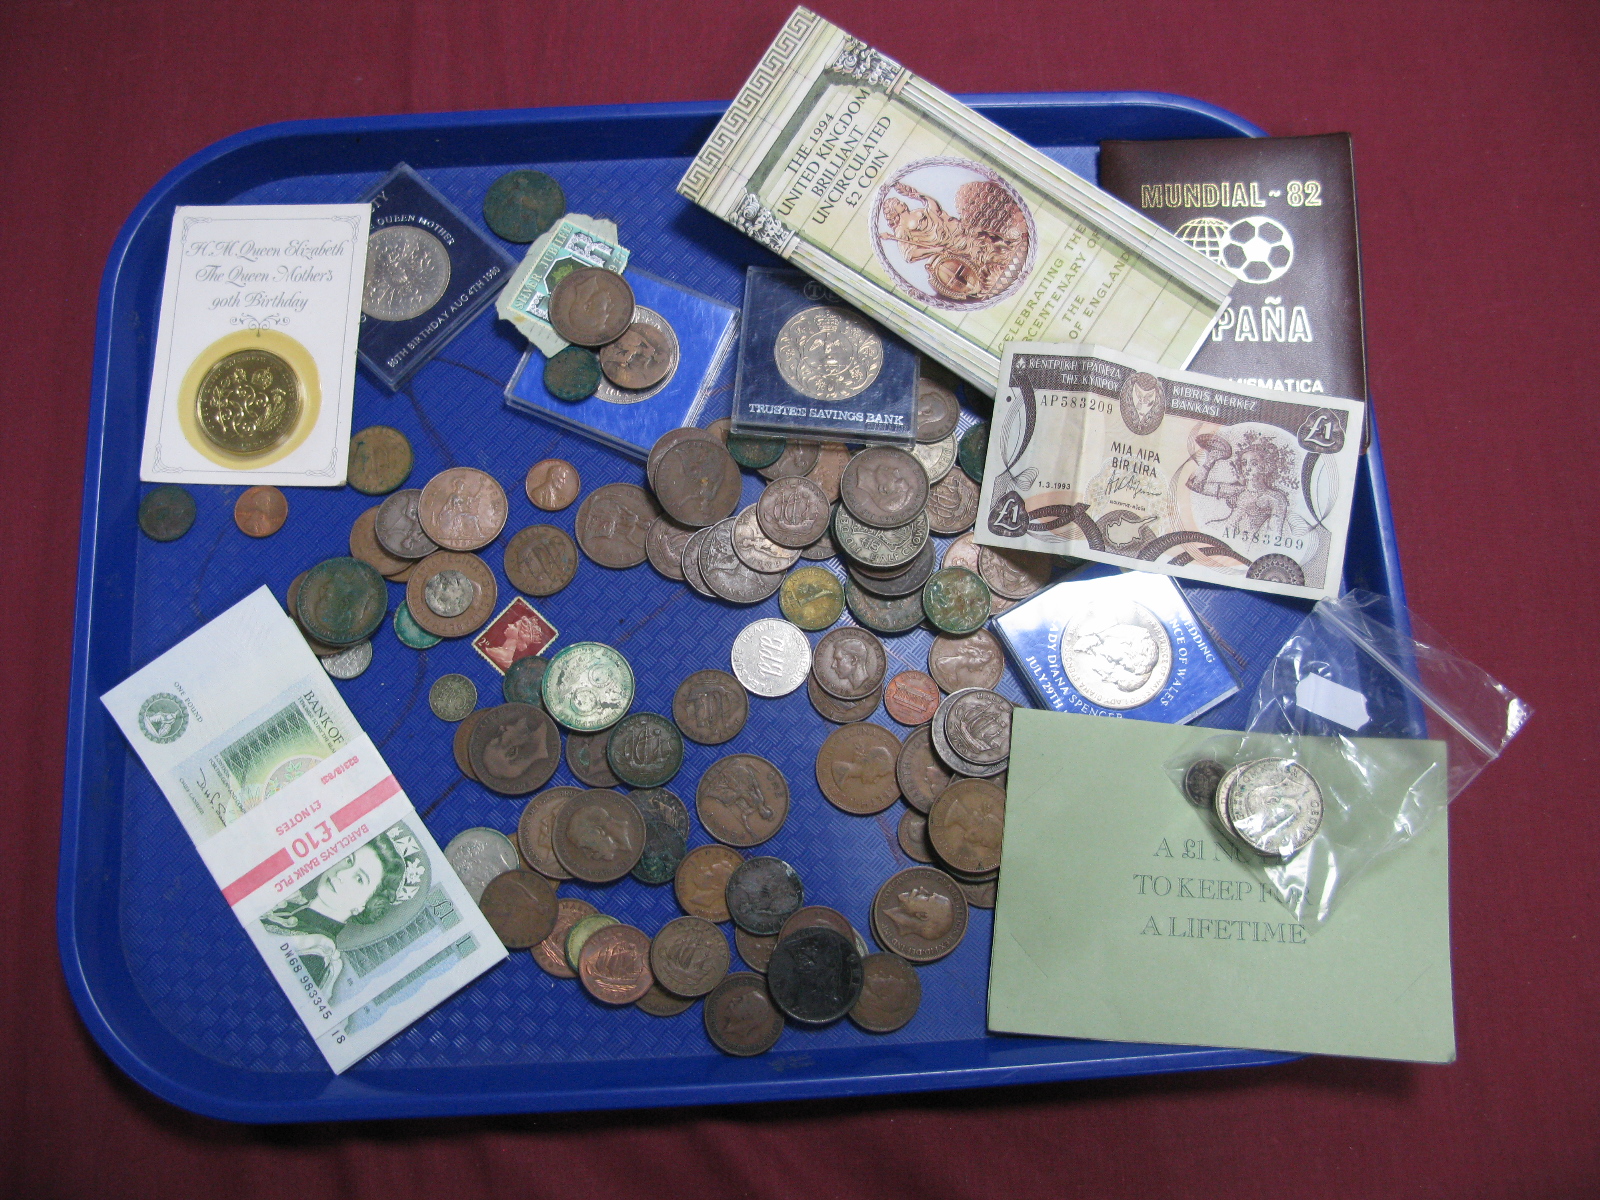 A Collection of GB and Overseas Coins, to include The Royal Mint 1994 UK BU £2 coin, Espana